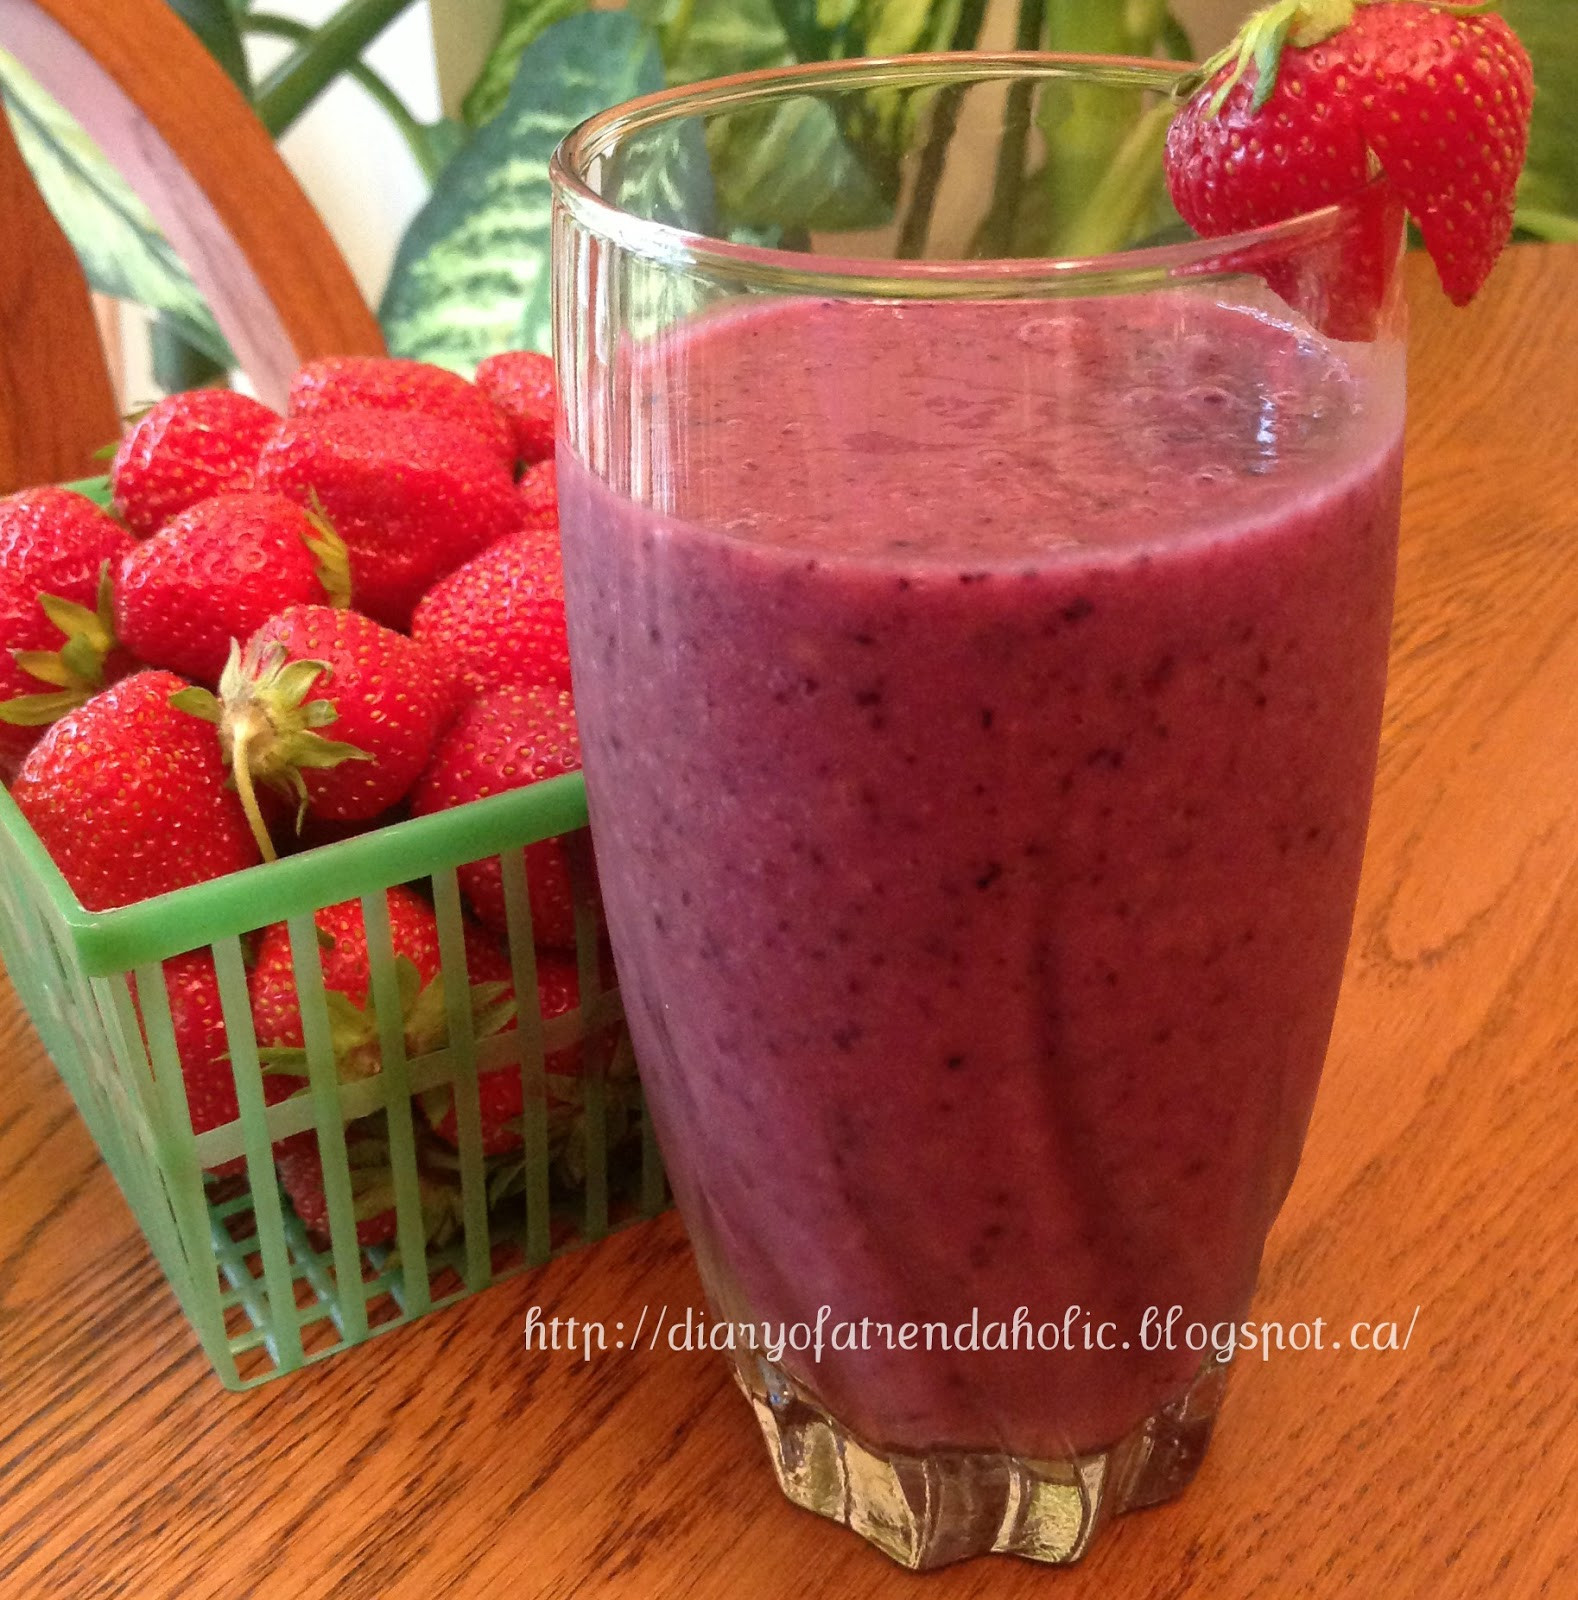 Ingredients For Healthy Fruit Smoothies
 Diary of a Trendaholic Fruit smoothie